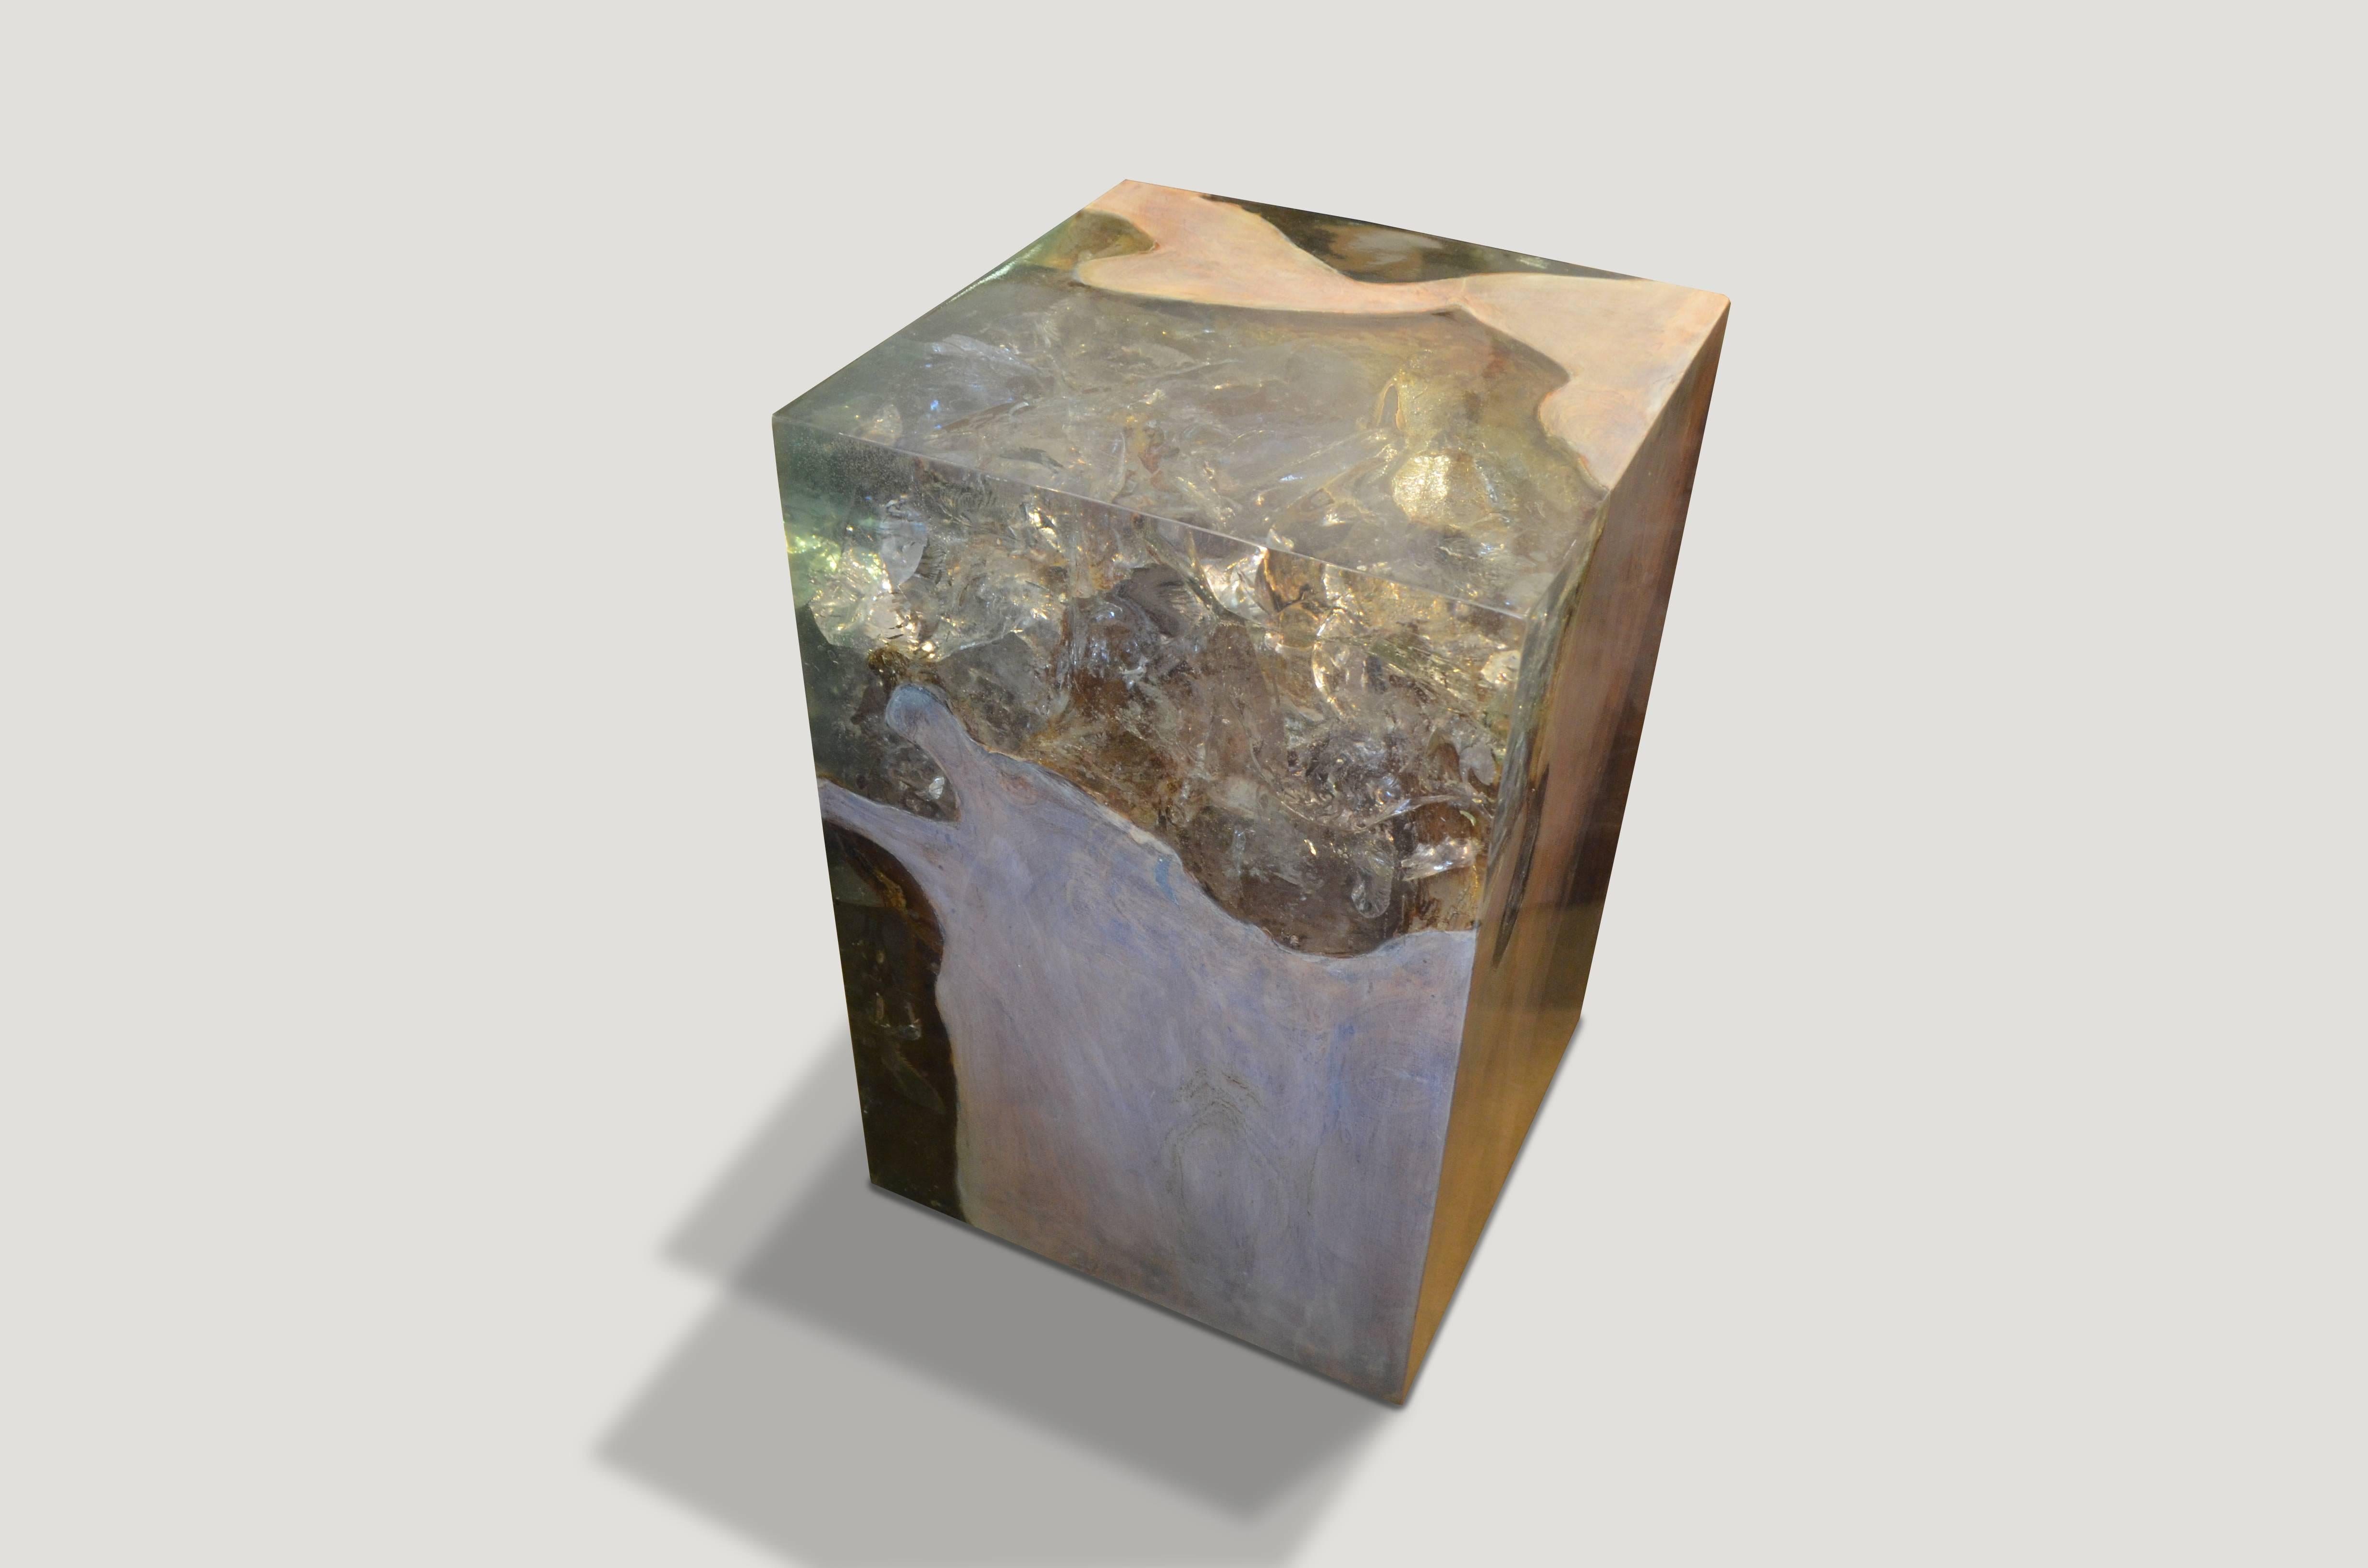 The St. Barts side table is a unique variation of the teak wood and cracked resin cube. Ice blue or aqua resin is cracked and added into the natural grooves of the bleached teak wood, sanded and finished with a high polish.

The St. Barts collection